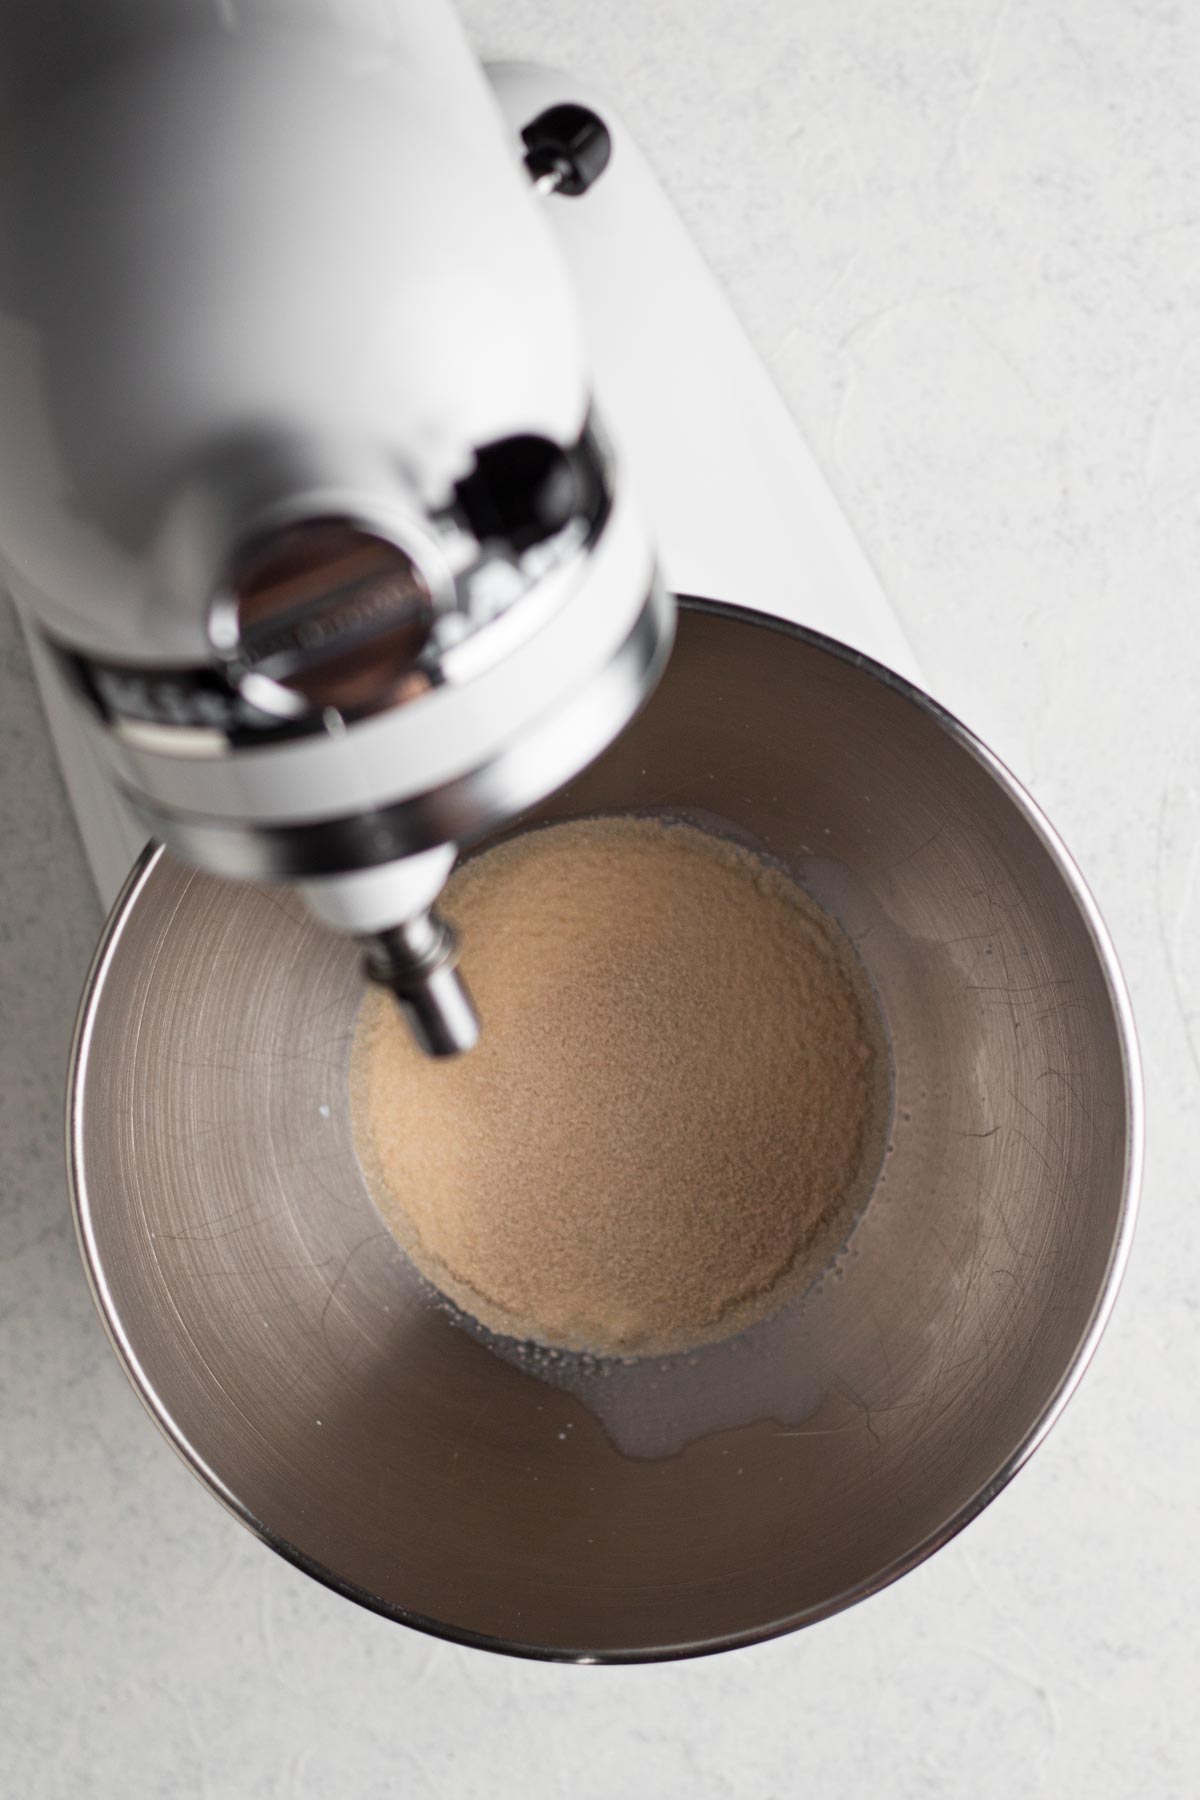 Milk and yeast in the bowl of a white stand mixer on a white surface.